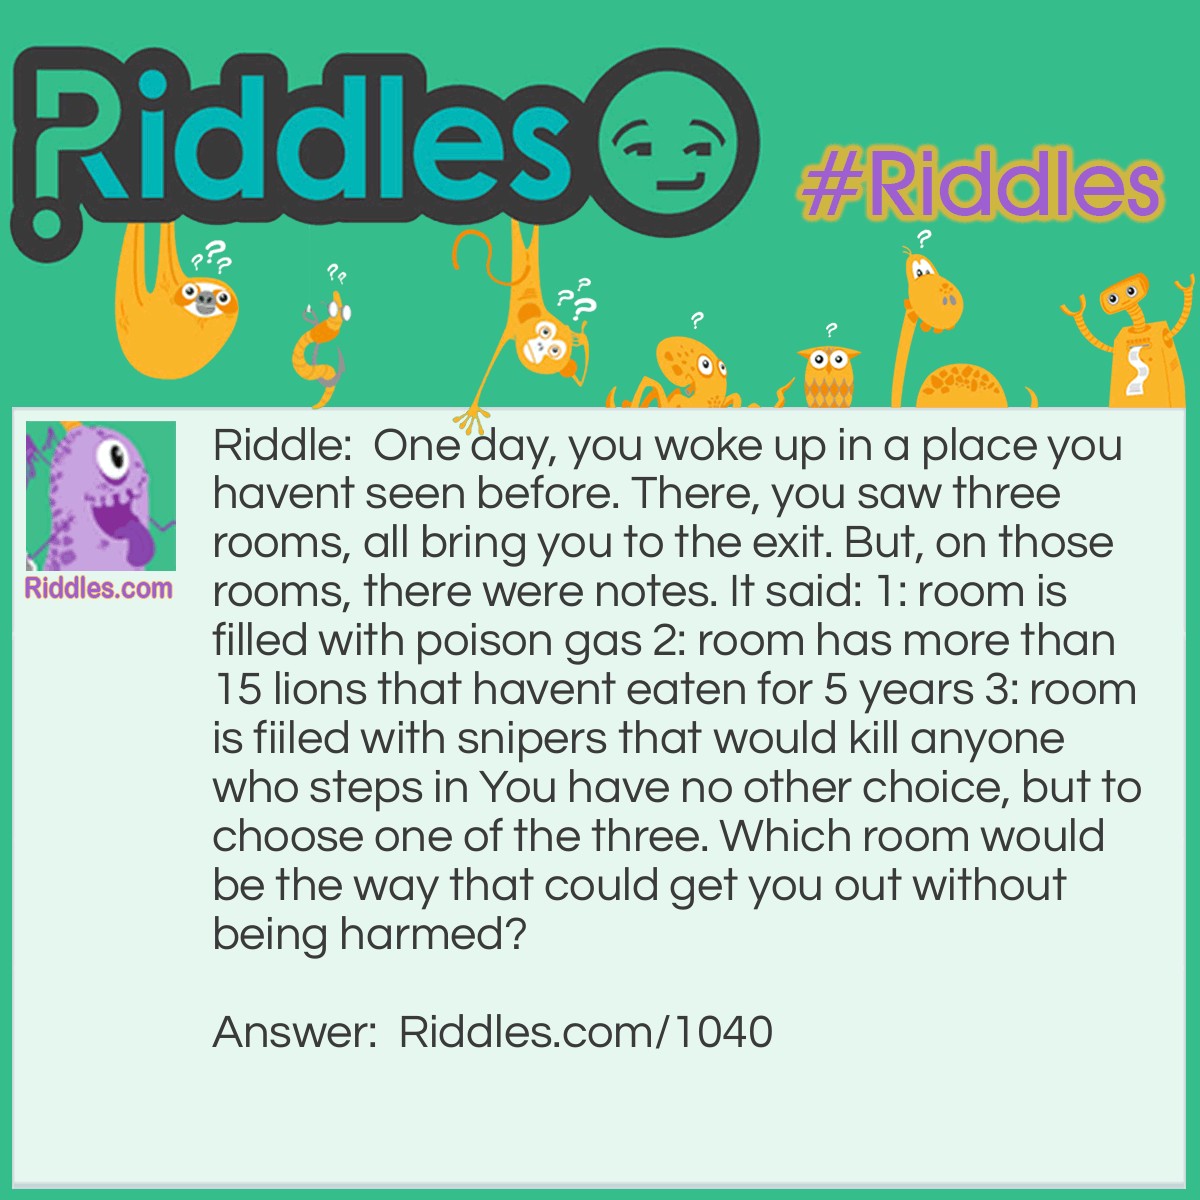 Riddle: One day, you woke up in a place you havent seen before. There, you saw three rooms, all bring you to the exit. But, on those rooms, there were notes. It said: 1: room is filled with poison gas 2: room has more than 15 lions that havent eaten for 5 years 3: room is fiiled with snipers that would kill anyone who steps in You have no other choice, but to choose one of the three. Which room would be the way that could get you out without being harmed? Answer: 2. Because if the lions hadn't eaten for five years, they would be dead.